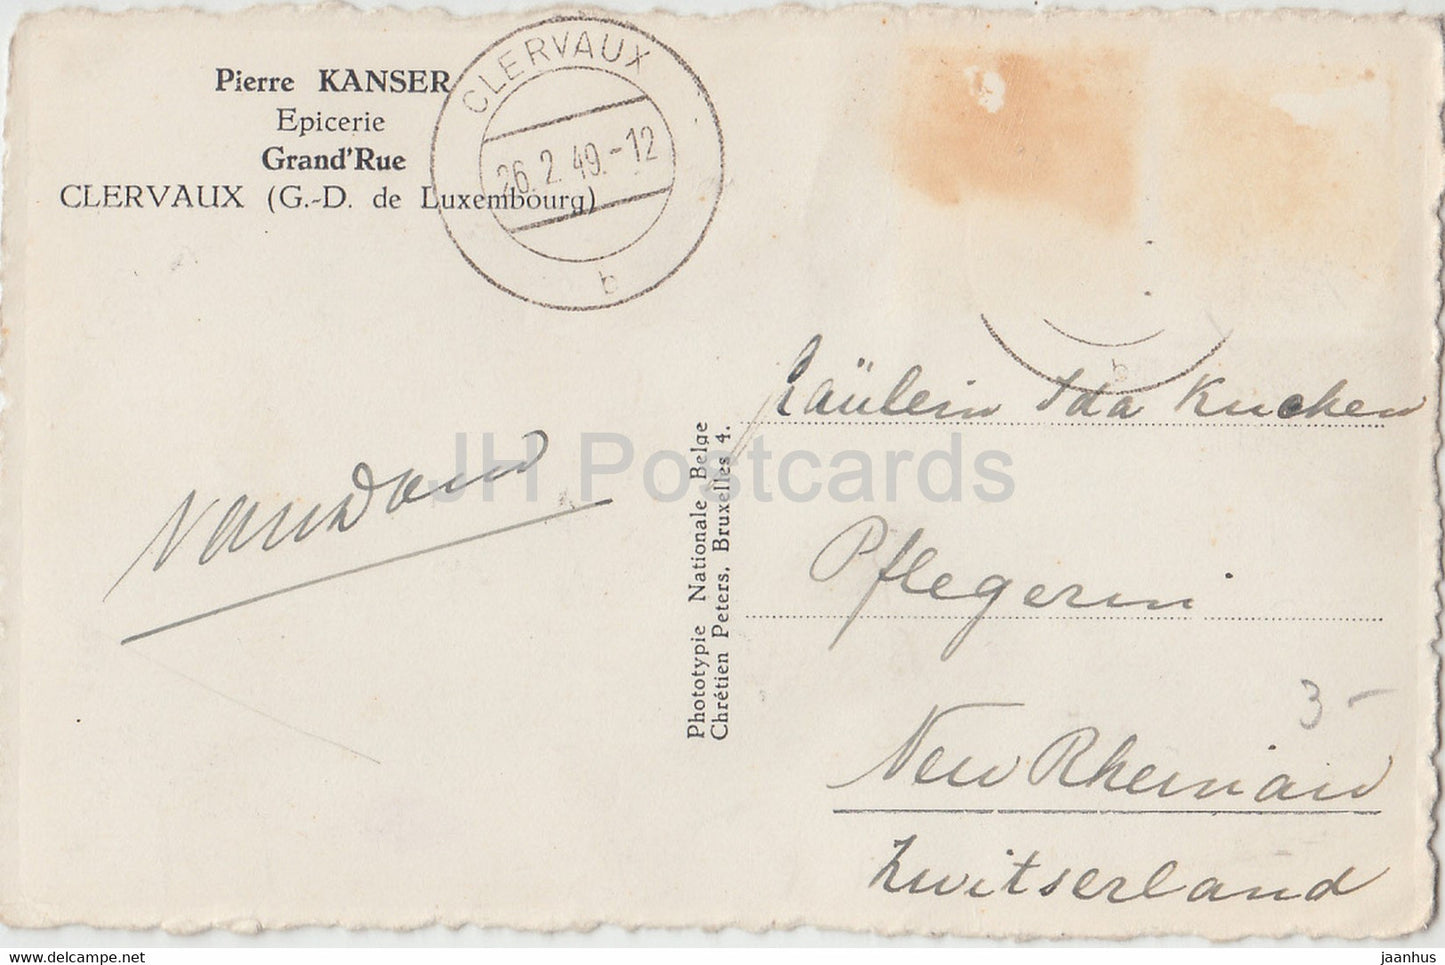 Clervaux - L'Abbaye - Pierre Kanser - 262 - old postcard - 1949 - Luxembourg - used